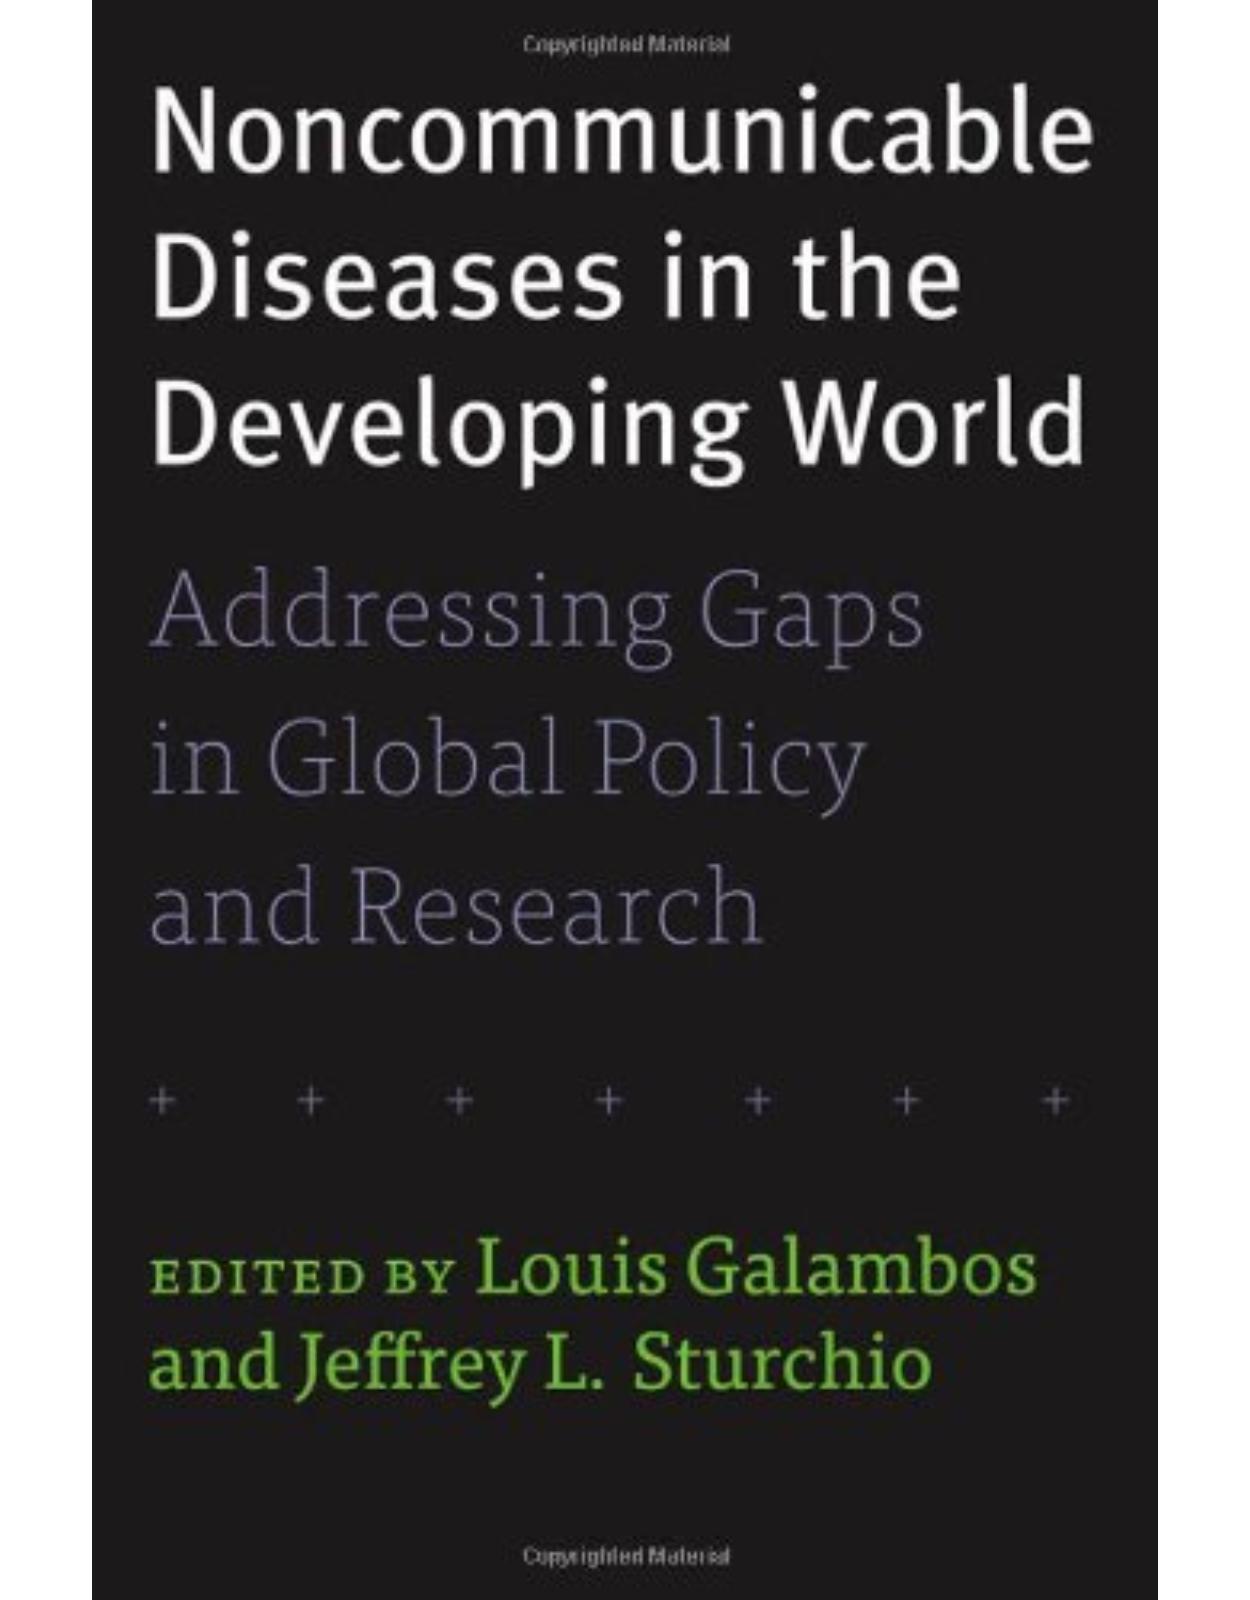 Noncommunicable Diseases in the Developing World, Addressing Gaps in Global Policy and Research